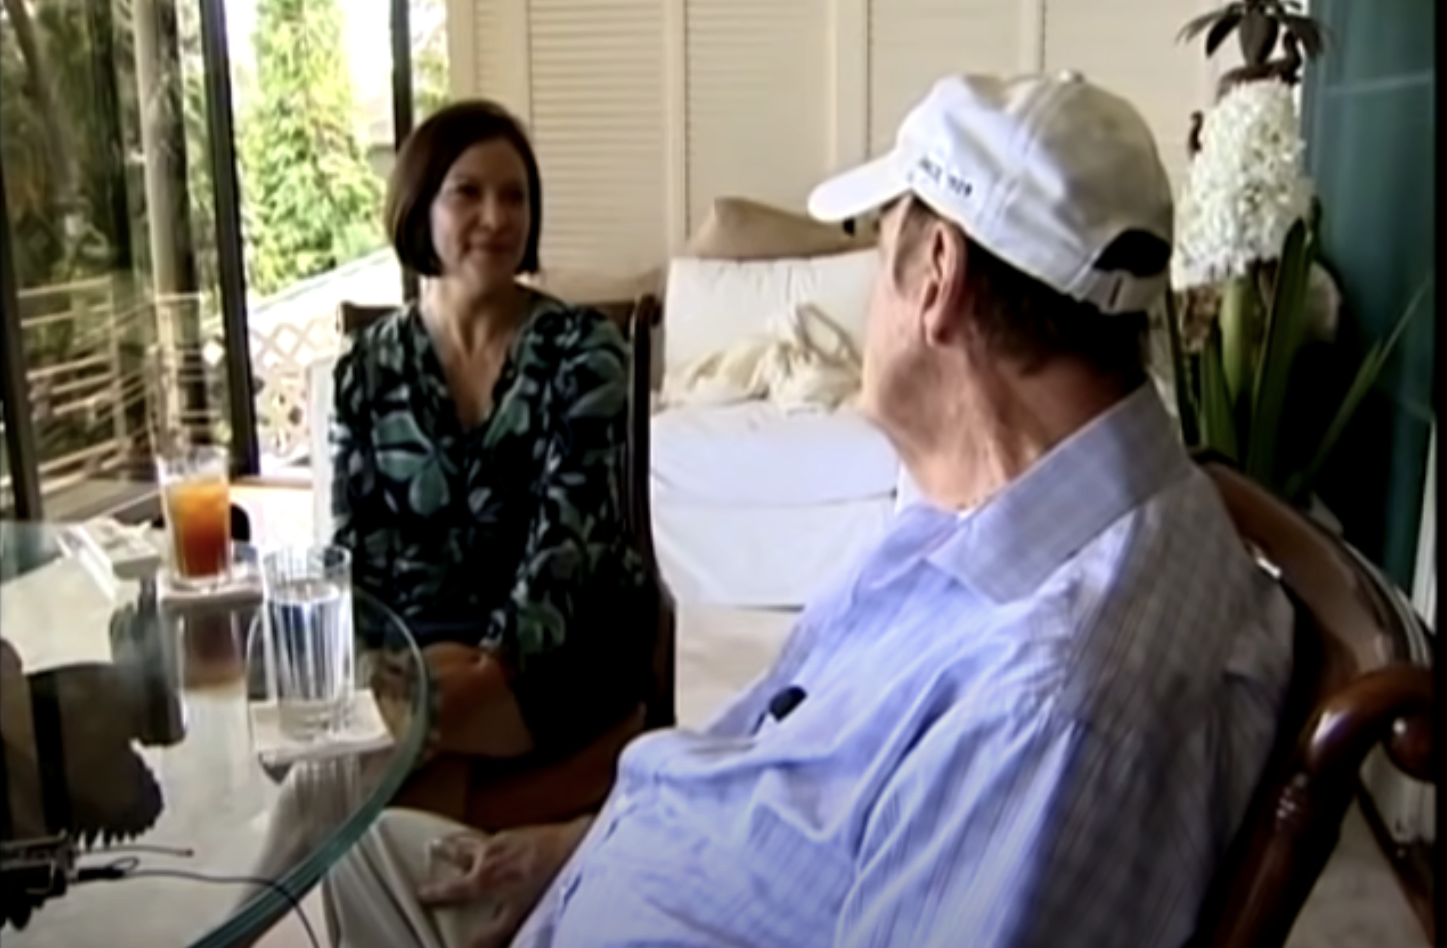 Jim Nabors being interviewed in his Hawaii home in 2012 | Source: youtube.com/@kitv